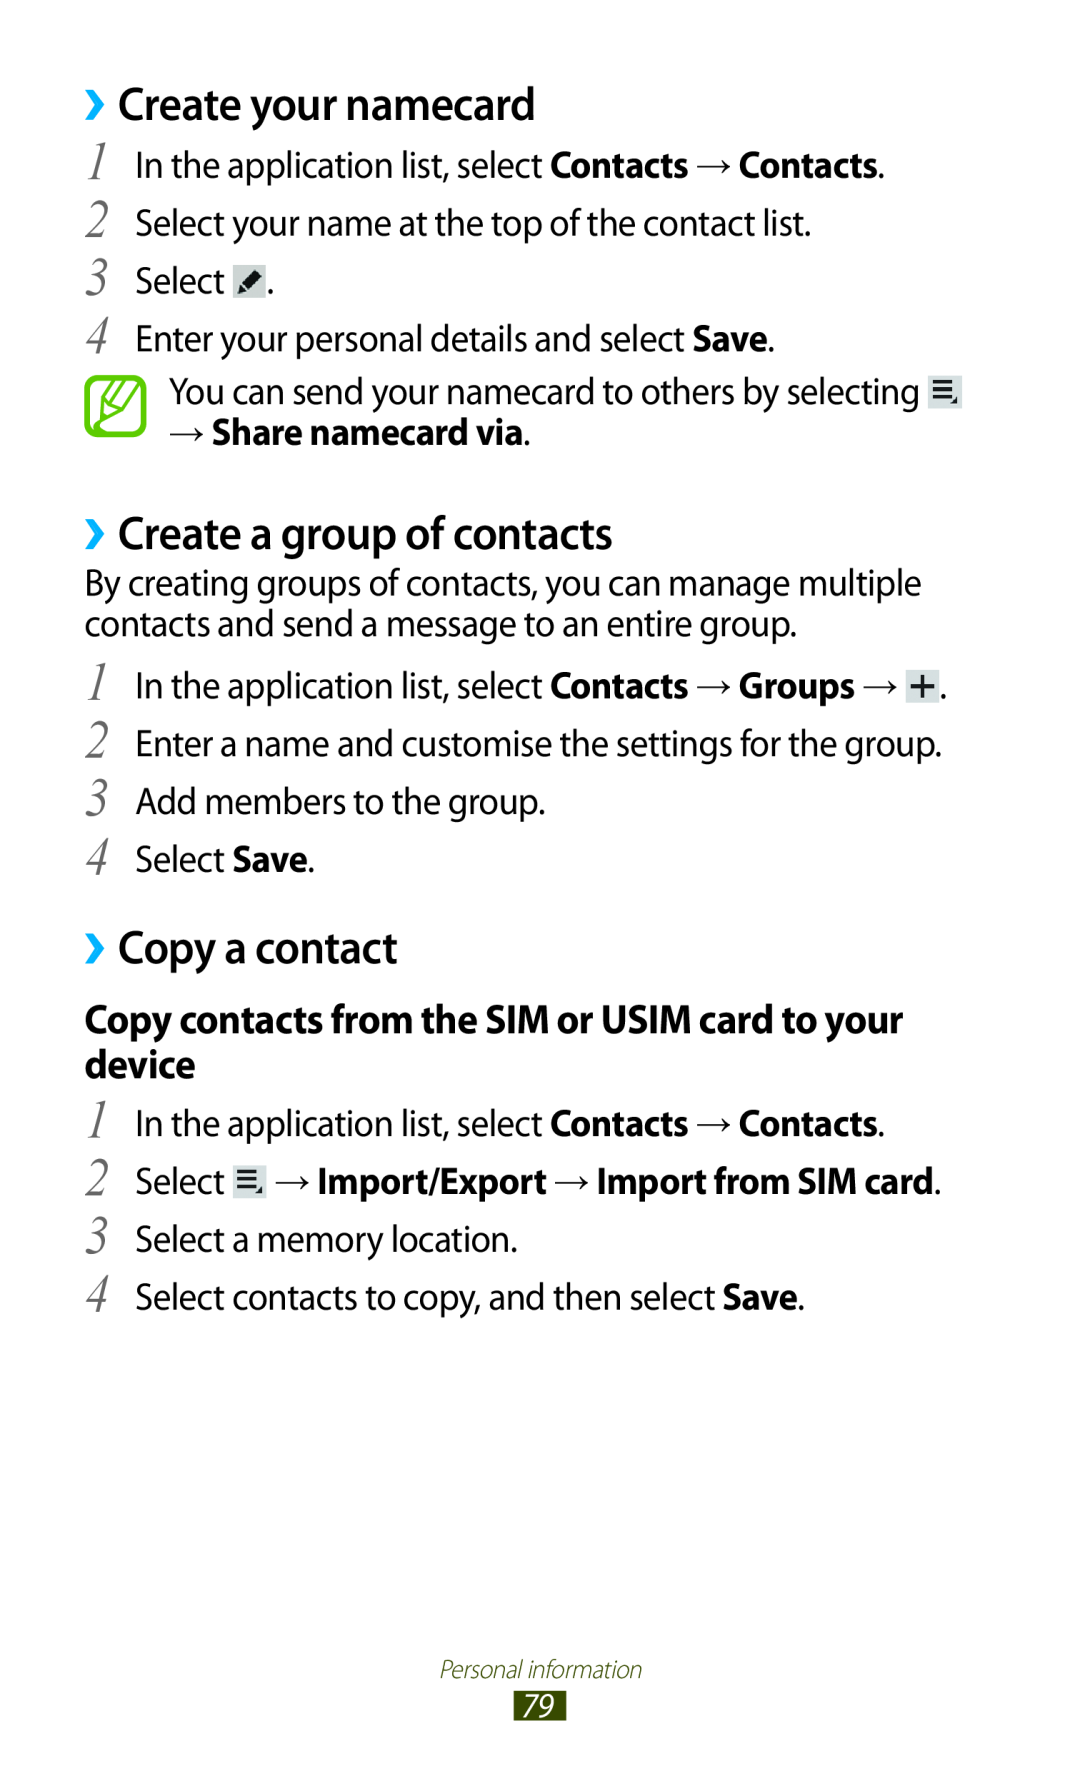 Samsung GT-P7500ZWDAFR, GT-P7500UWEDBT manual ››Create your namecard, ››Create a group of contacts, ››Copy a contact 